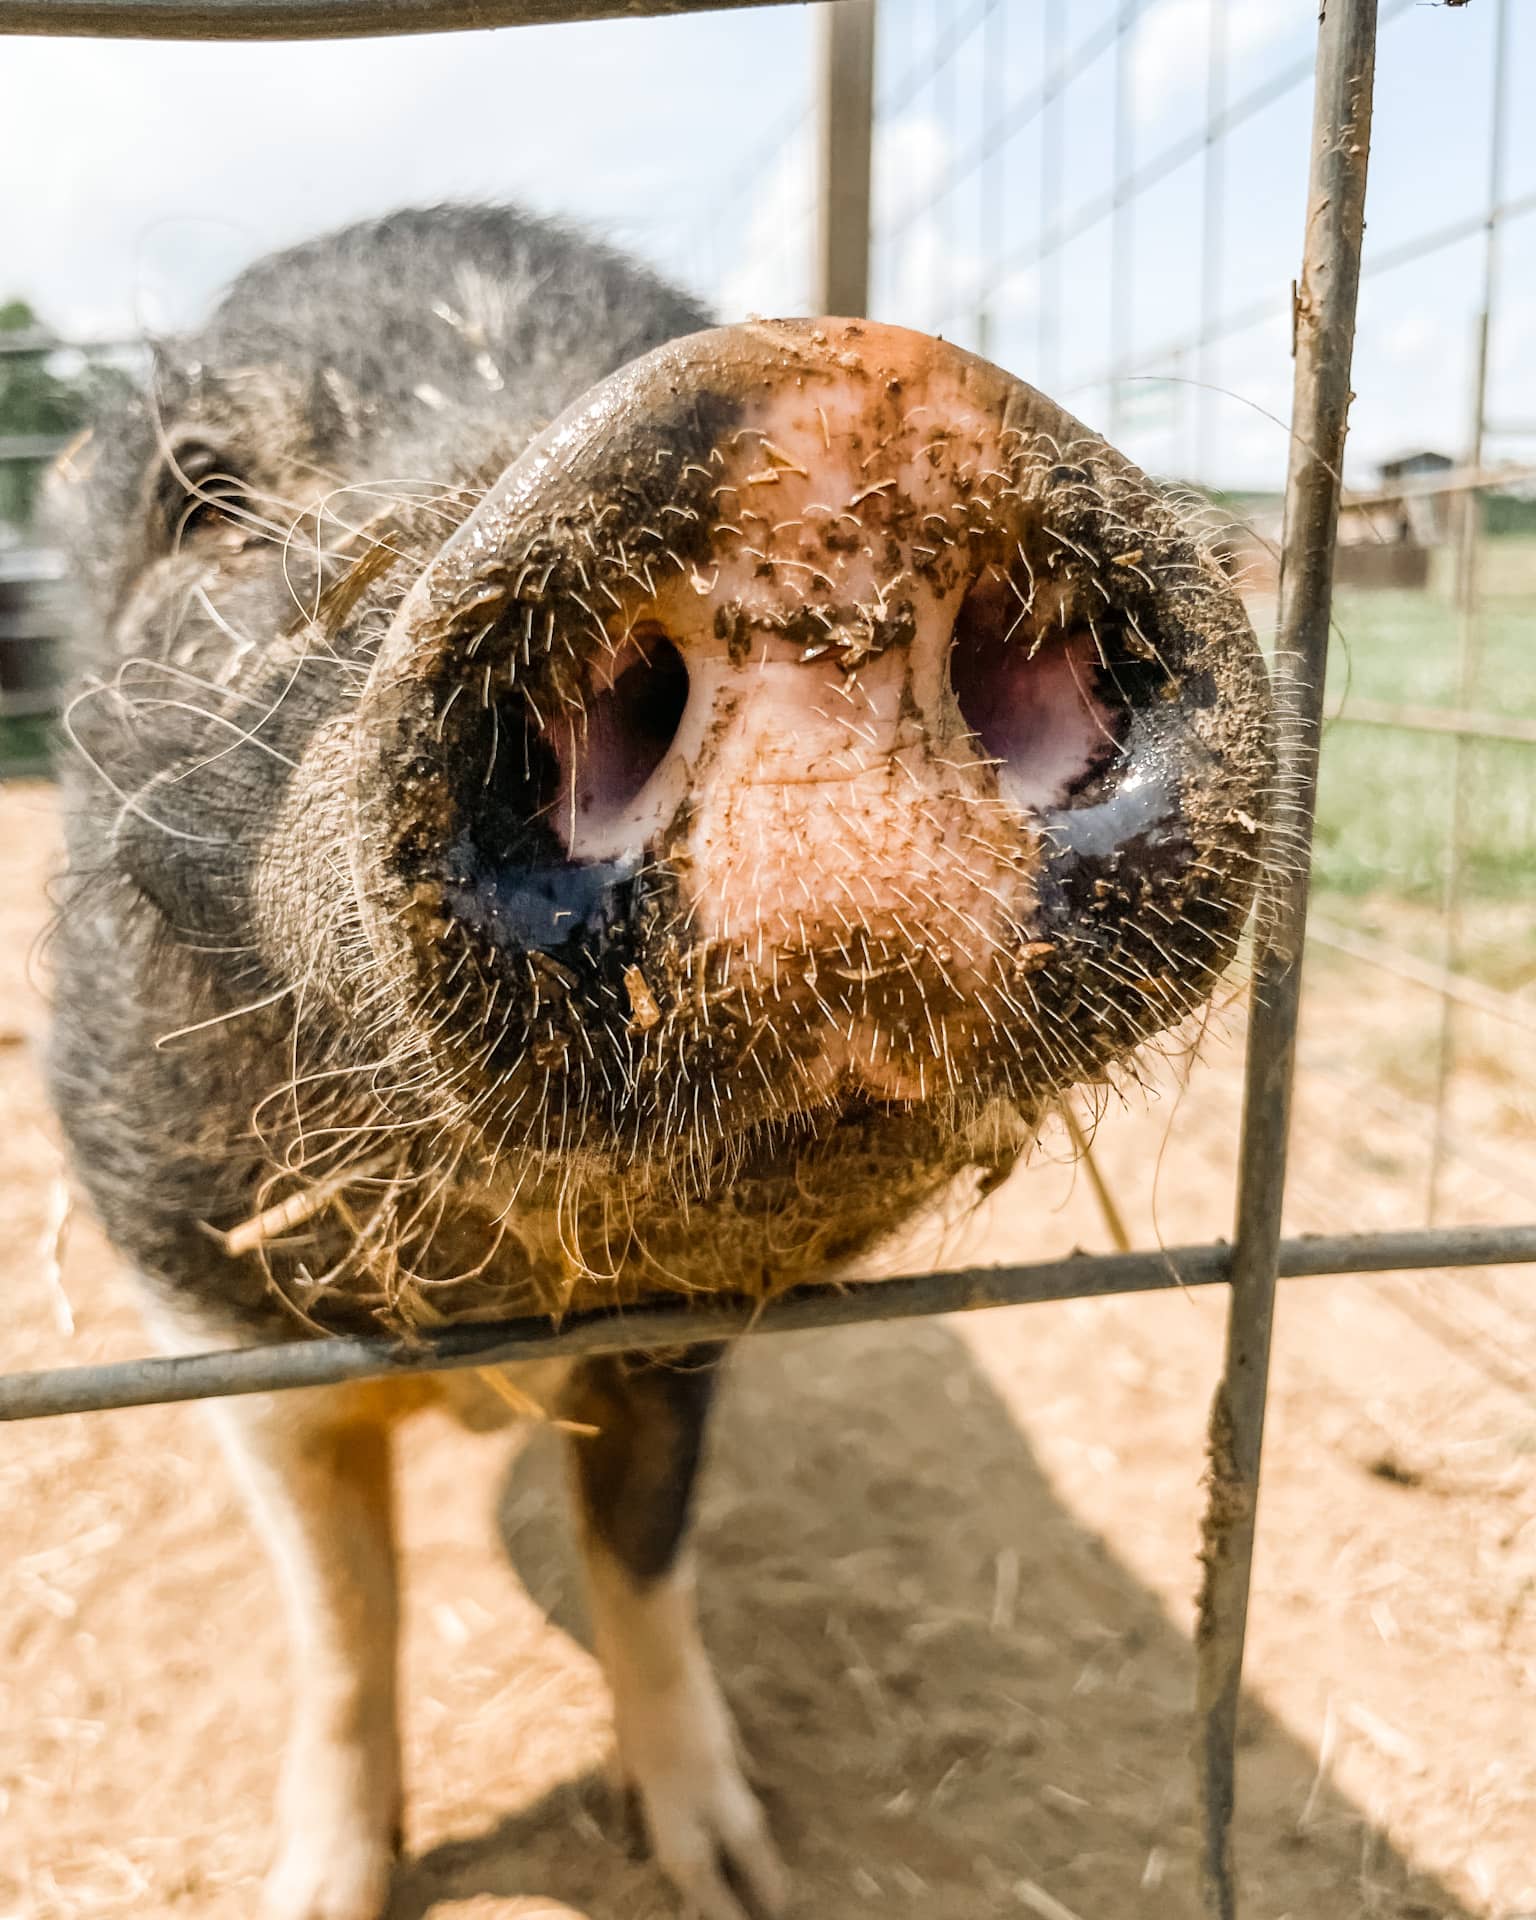 Close up of pig in a pen